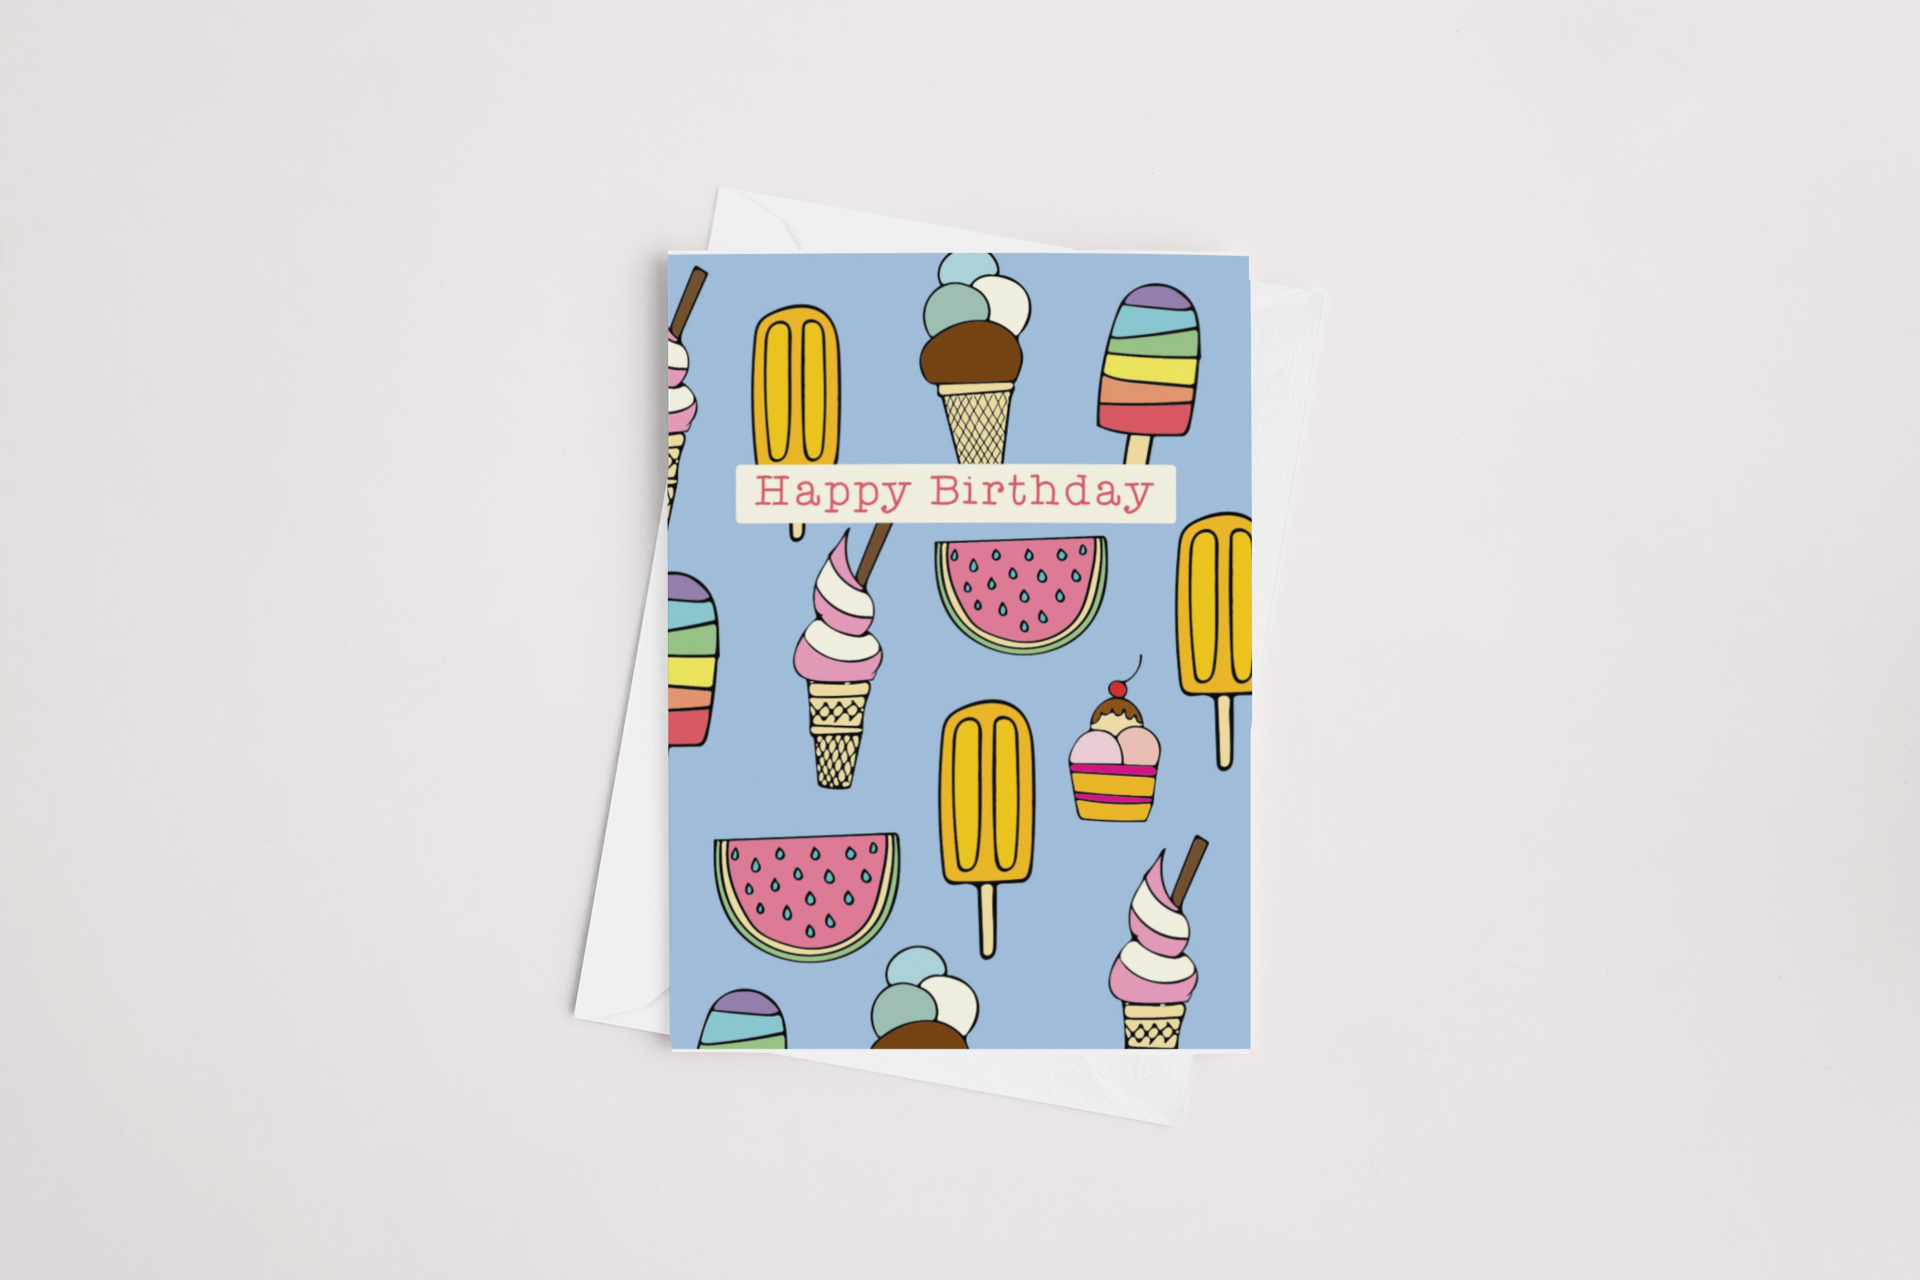 A Tuesday Print Ice Cream Birthday Card with a colorful illustration of assorted ice creams and popsicles, featuring the message "happy birthday" on a light blue background, blank inside.